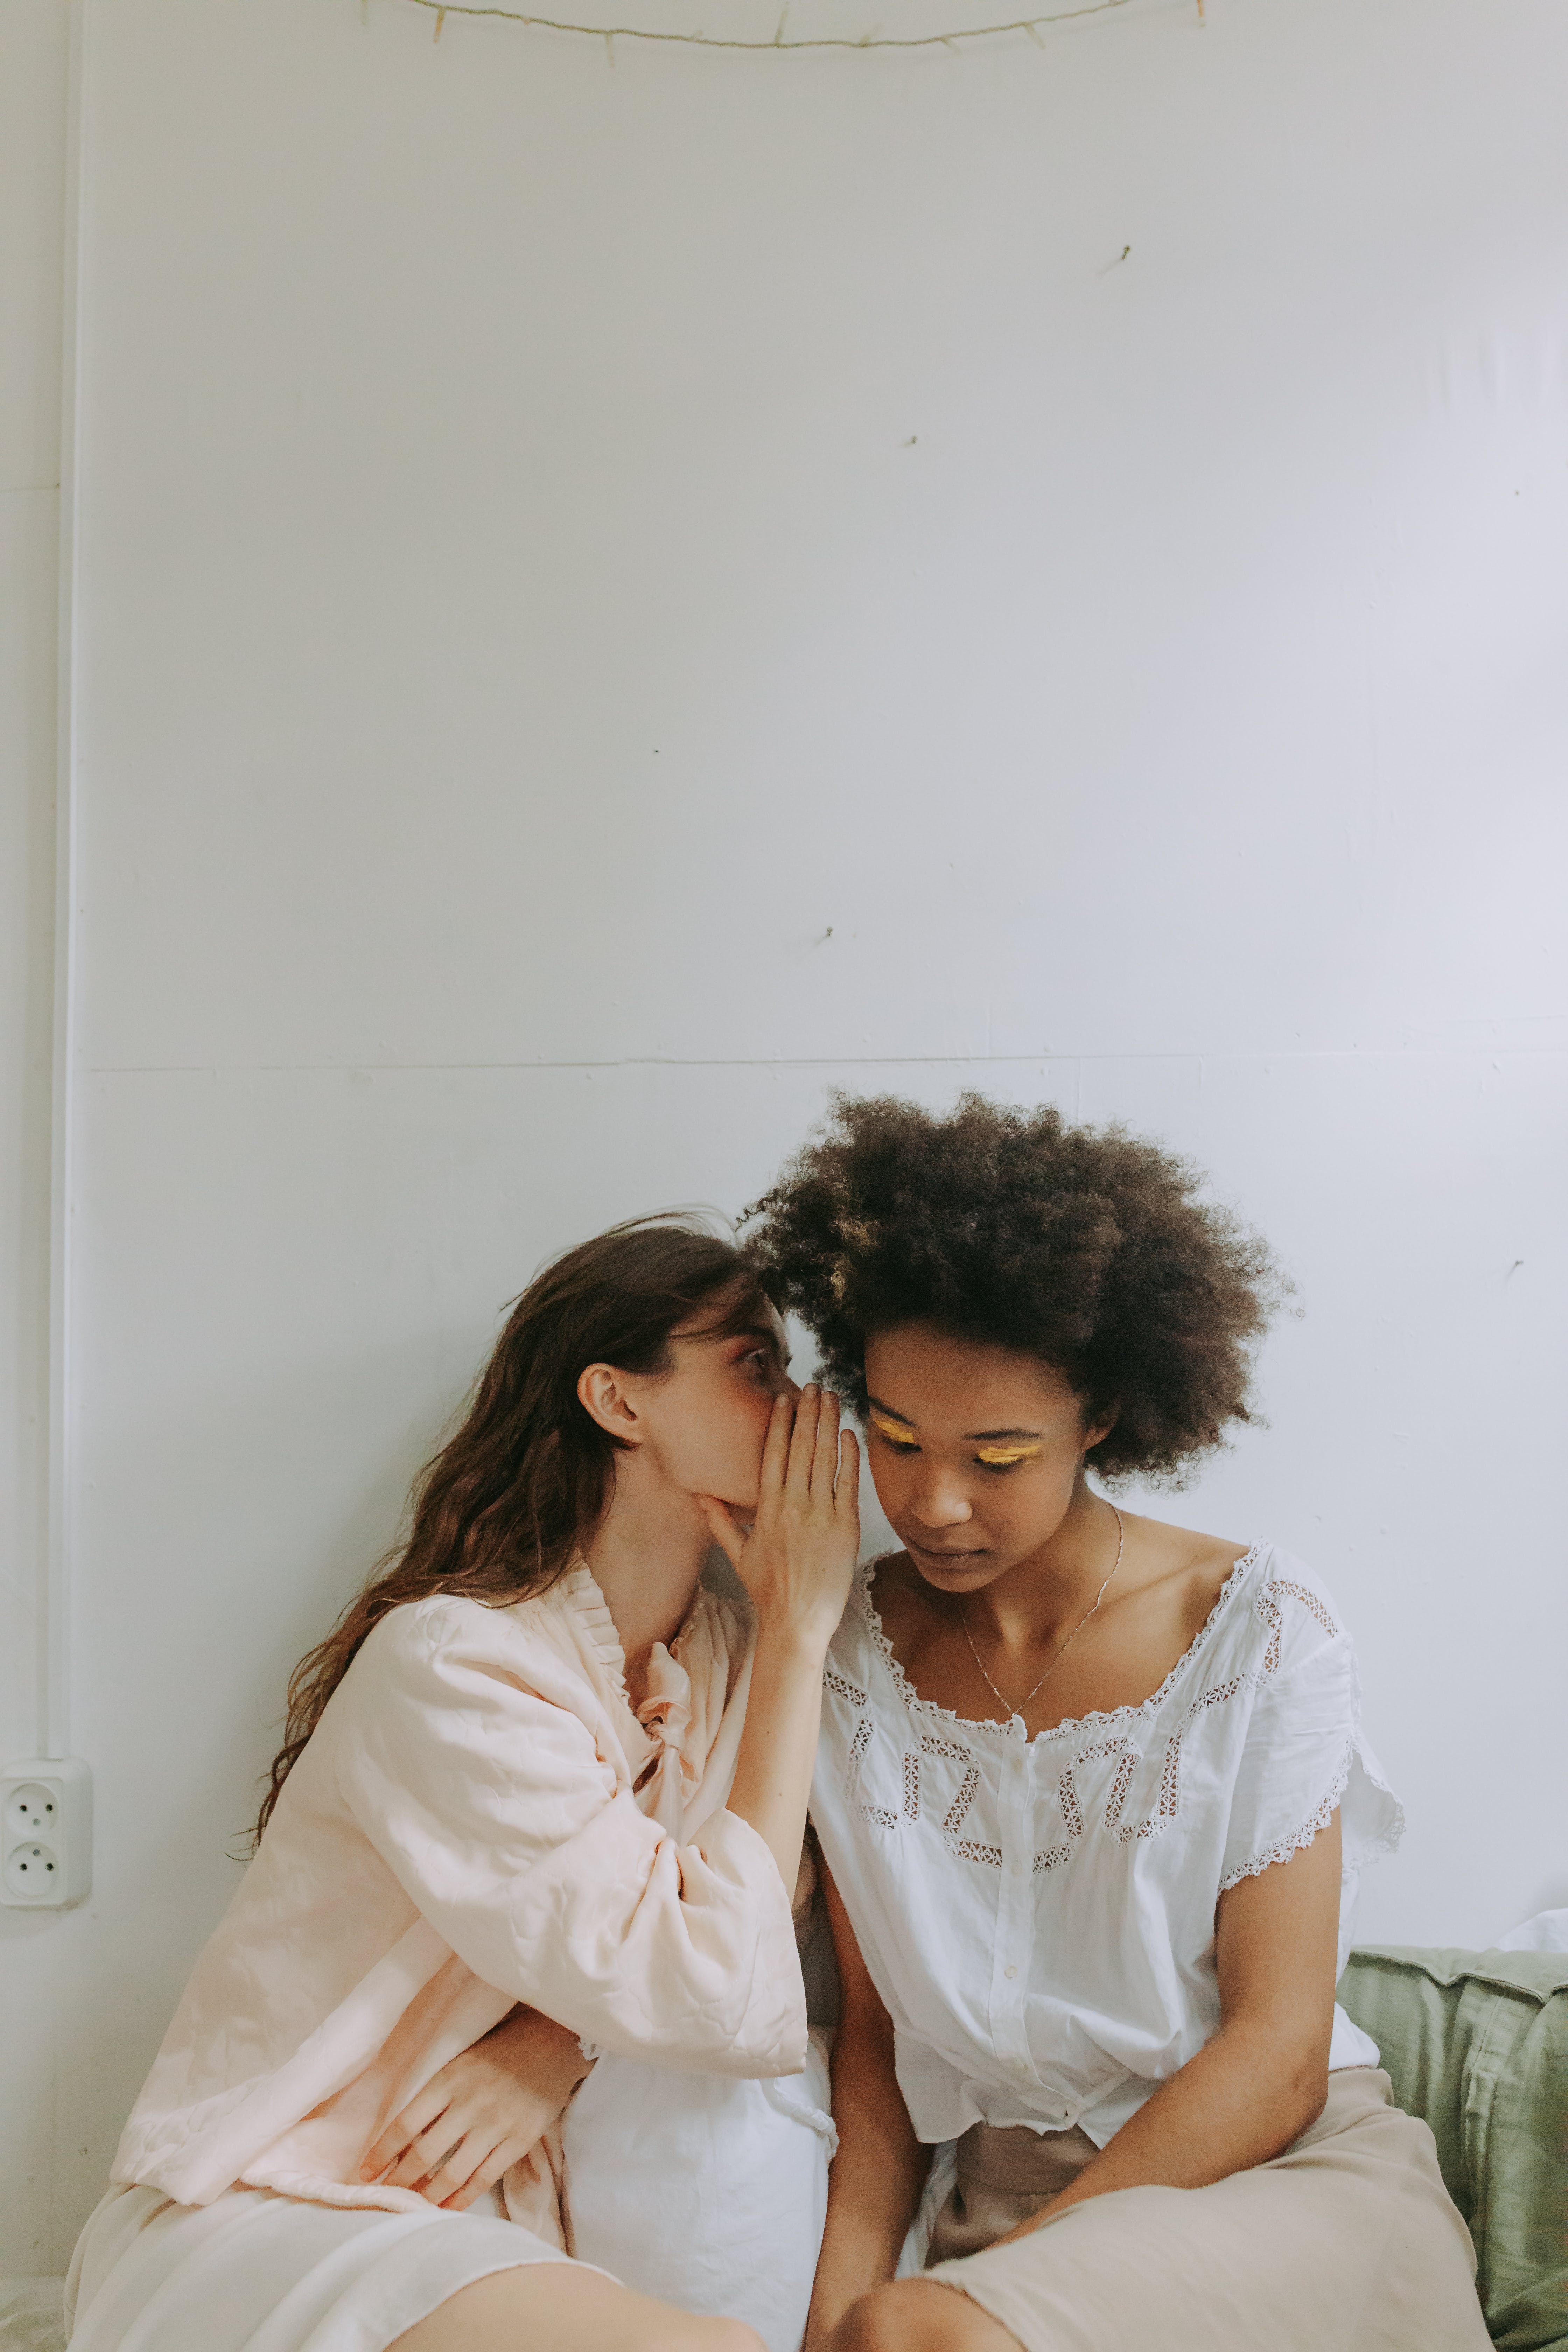 A person whispering to another person's ear. | Source: Pexels